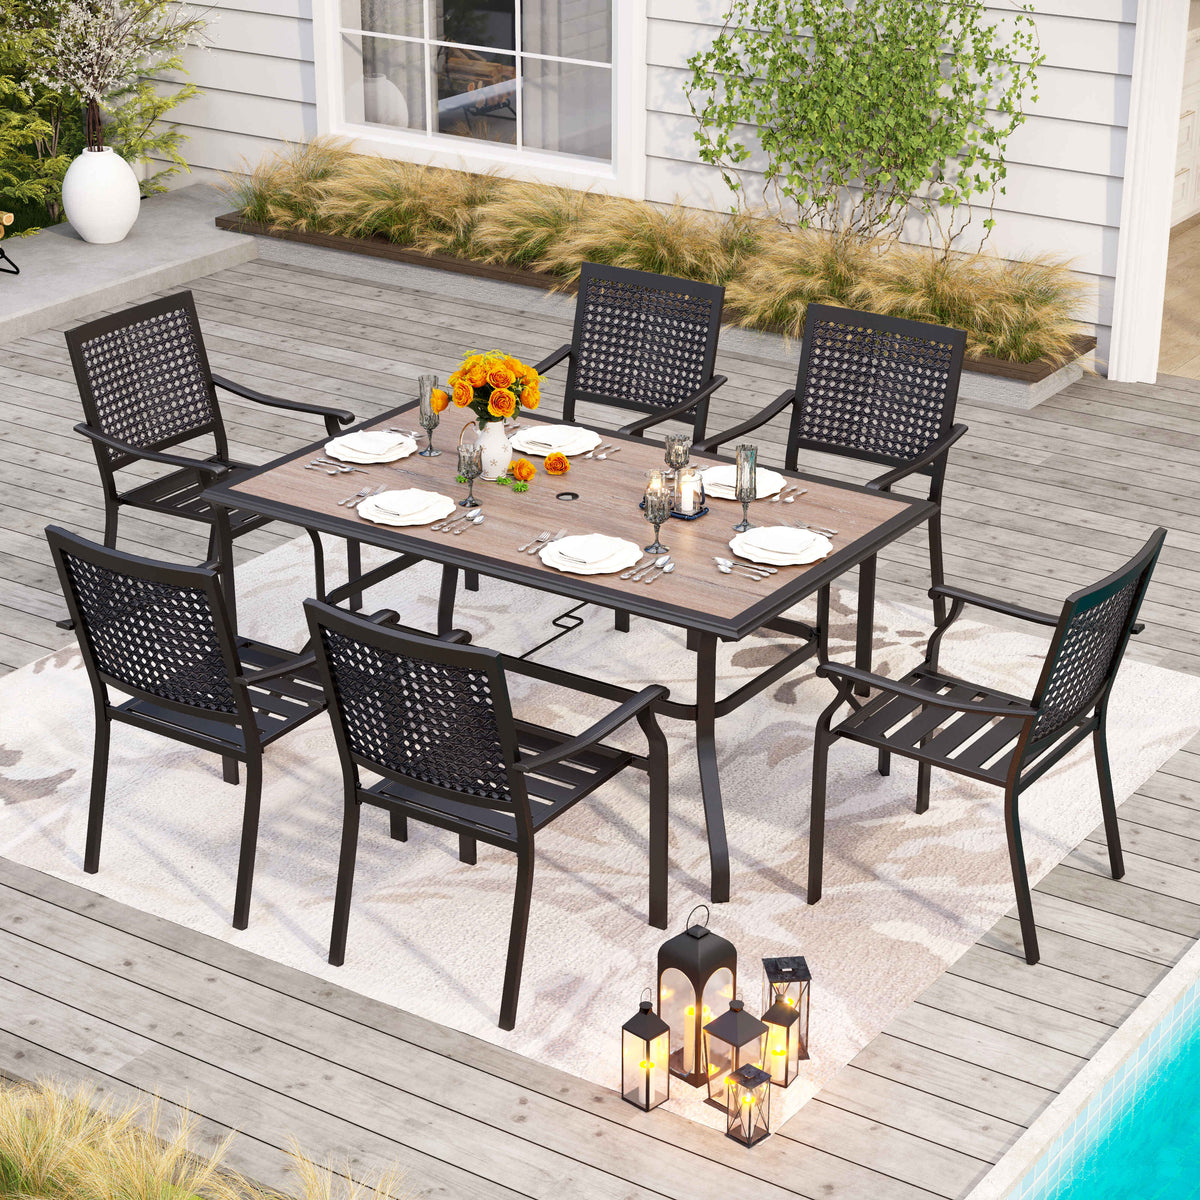 MFSTUDIO 7-Piece Outdoor Dining Set Wood-look Table & Bull's Eye Pattern Dining Chairs